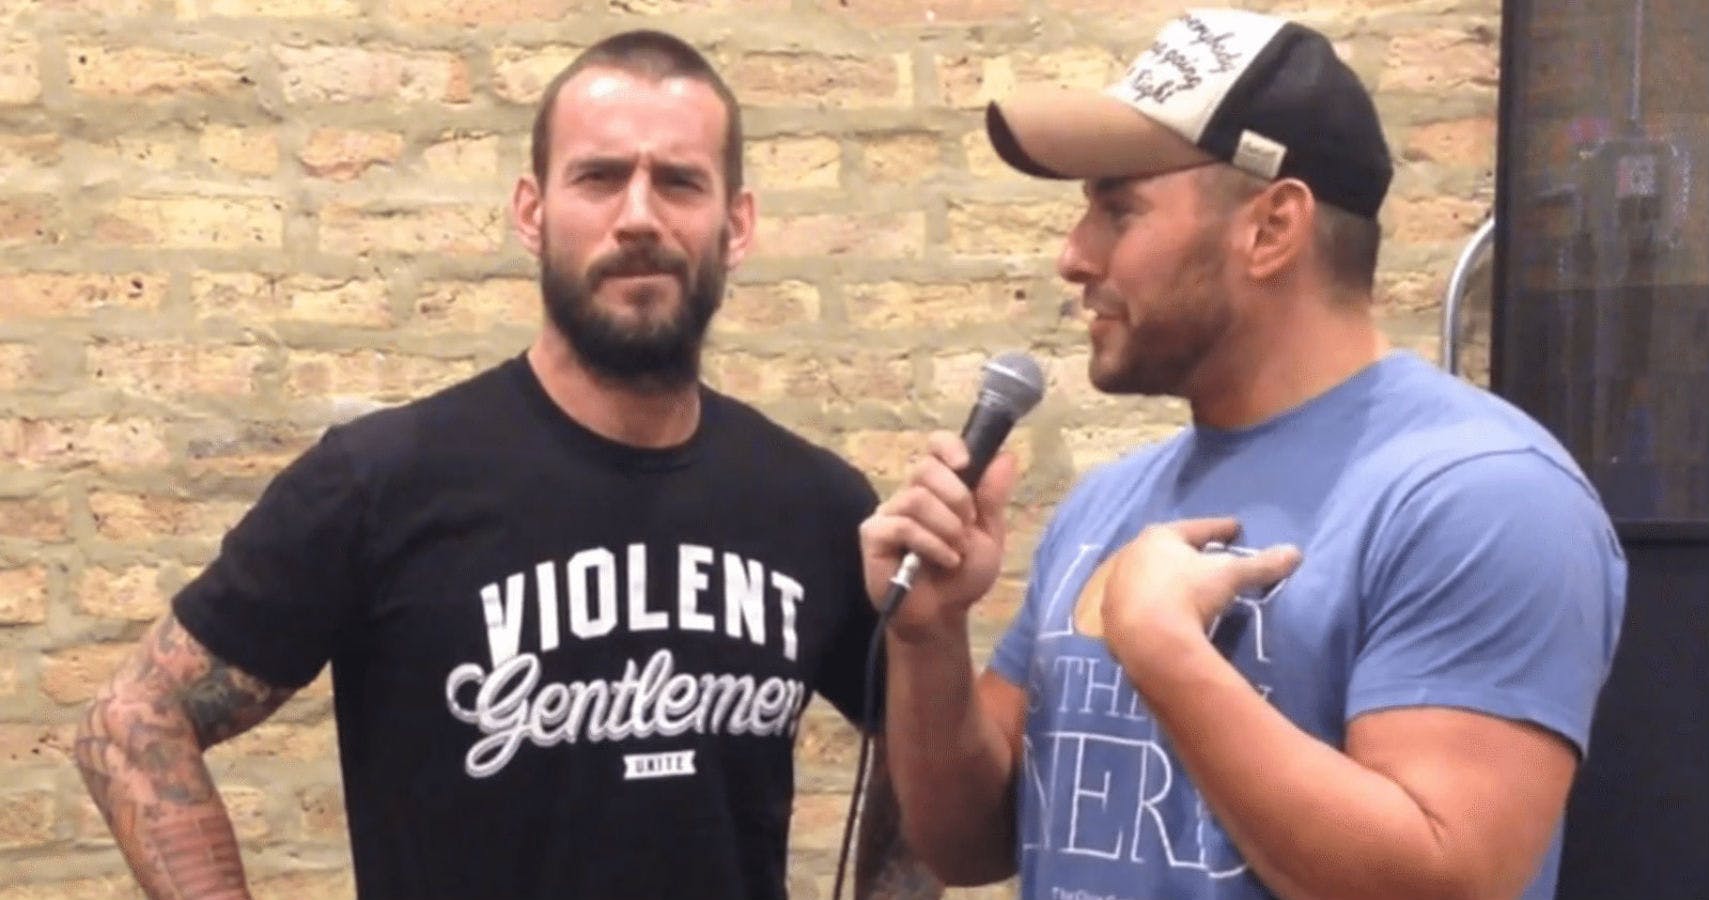 Colt Cabana is suing CM Punk for unpaid legal fees resulting from the recent WWE doctor lawsuit